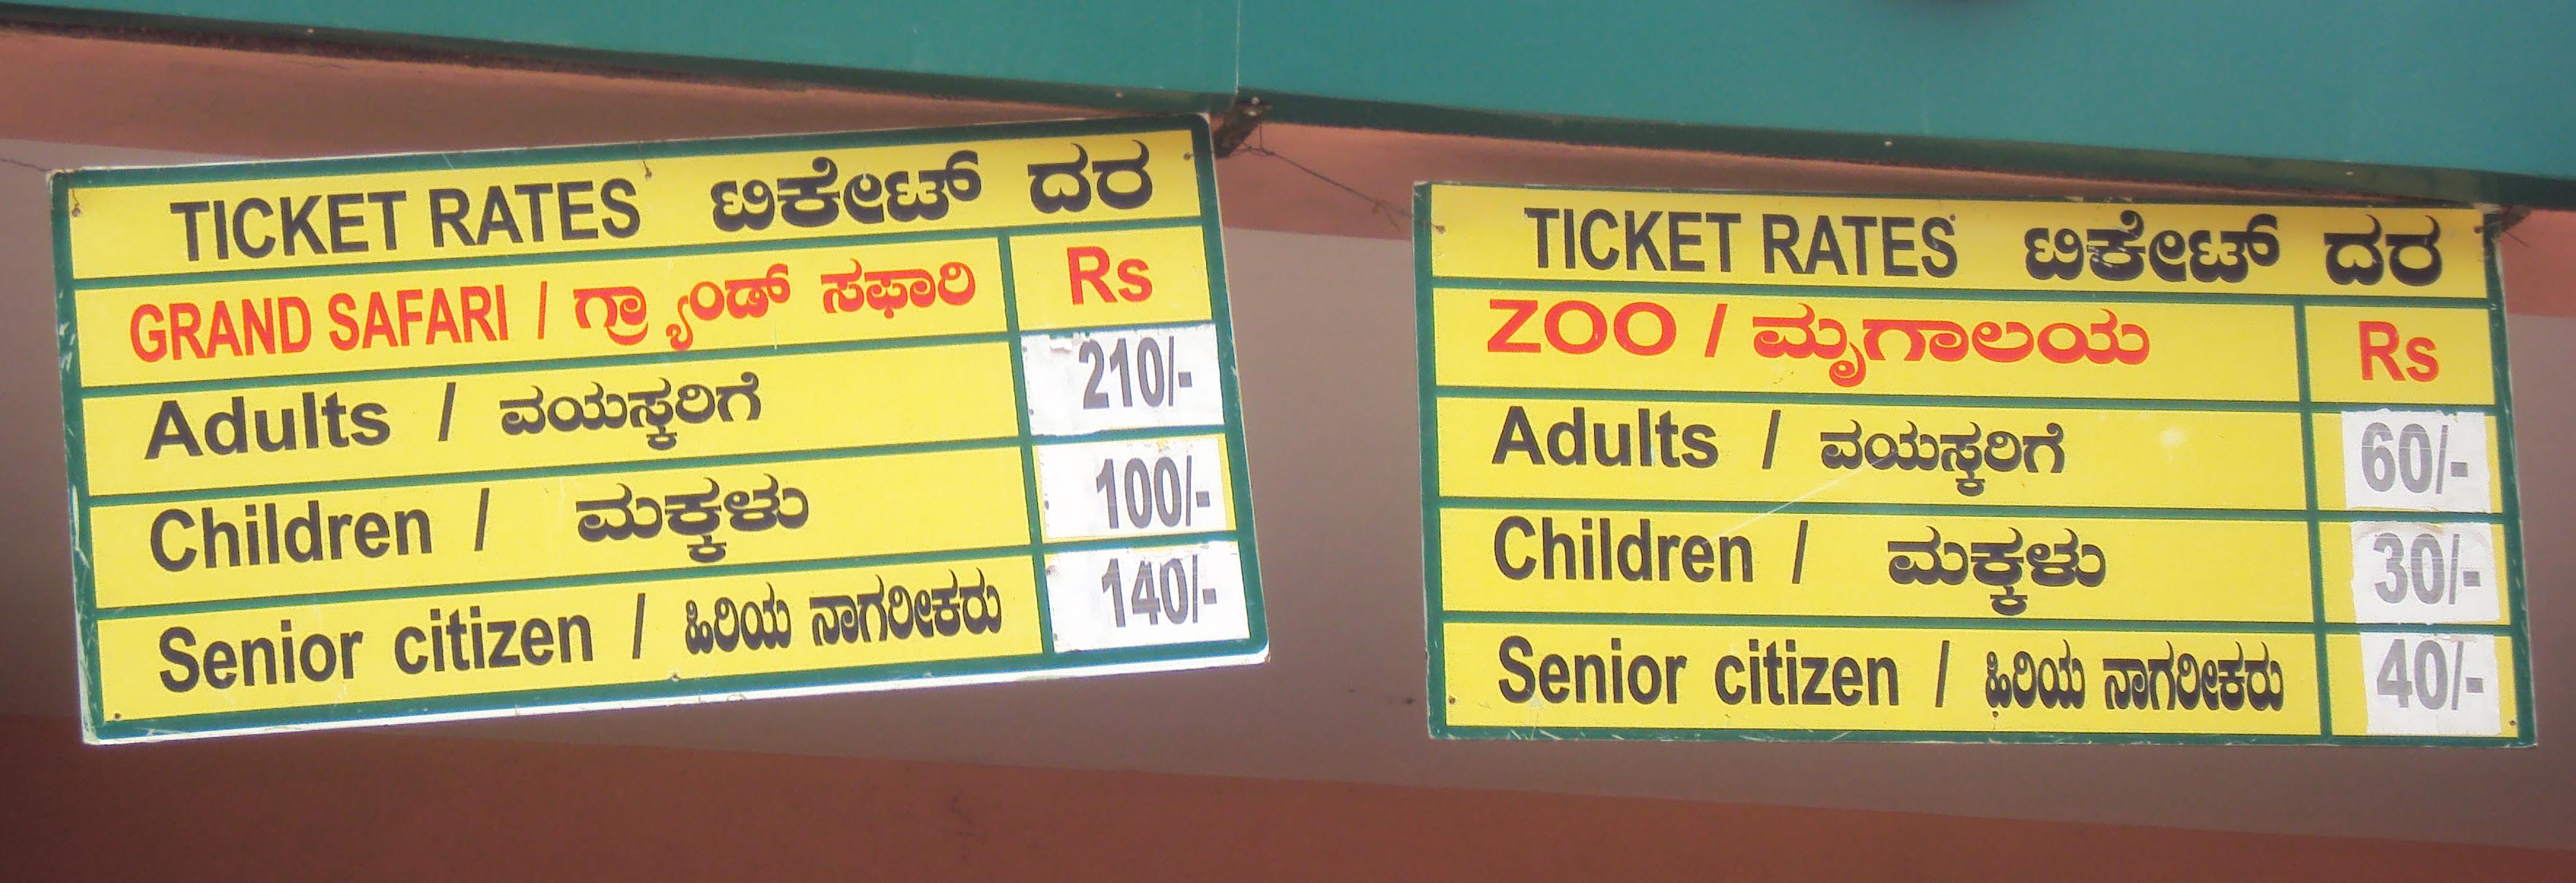 Bannerghatta National Park Timings And Entry Fee